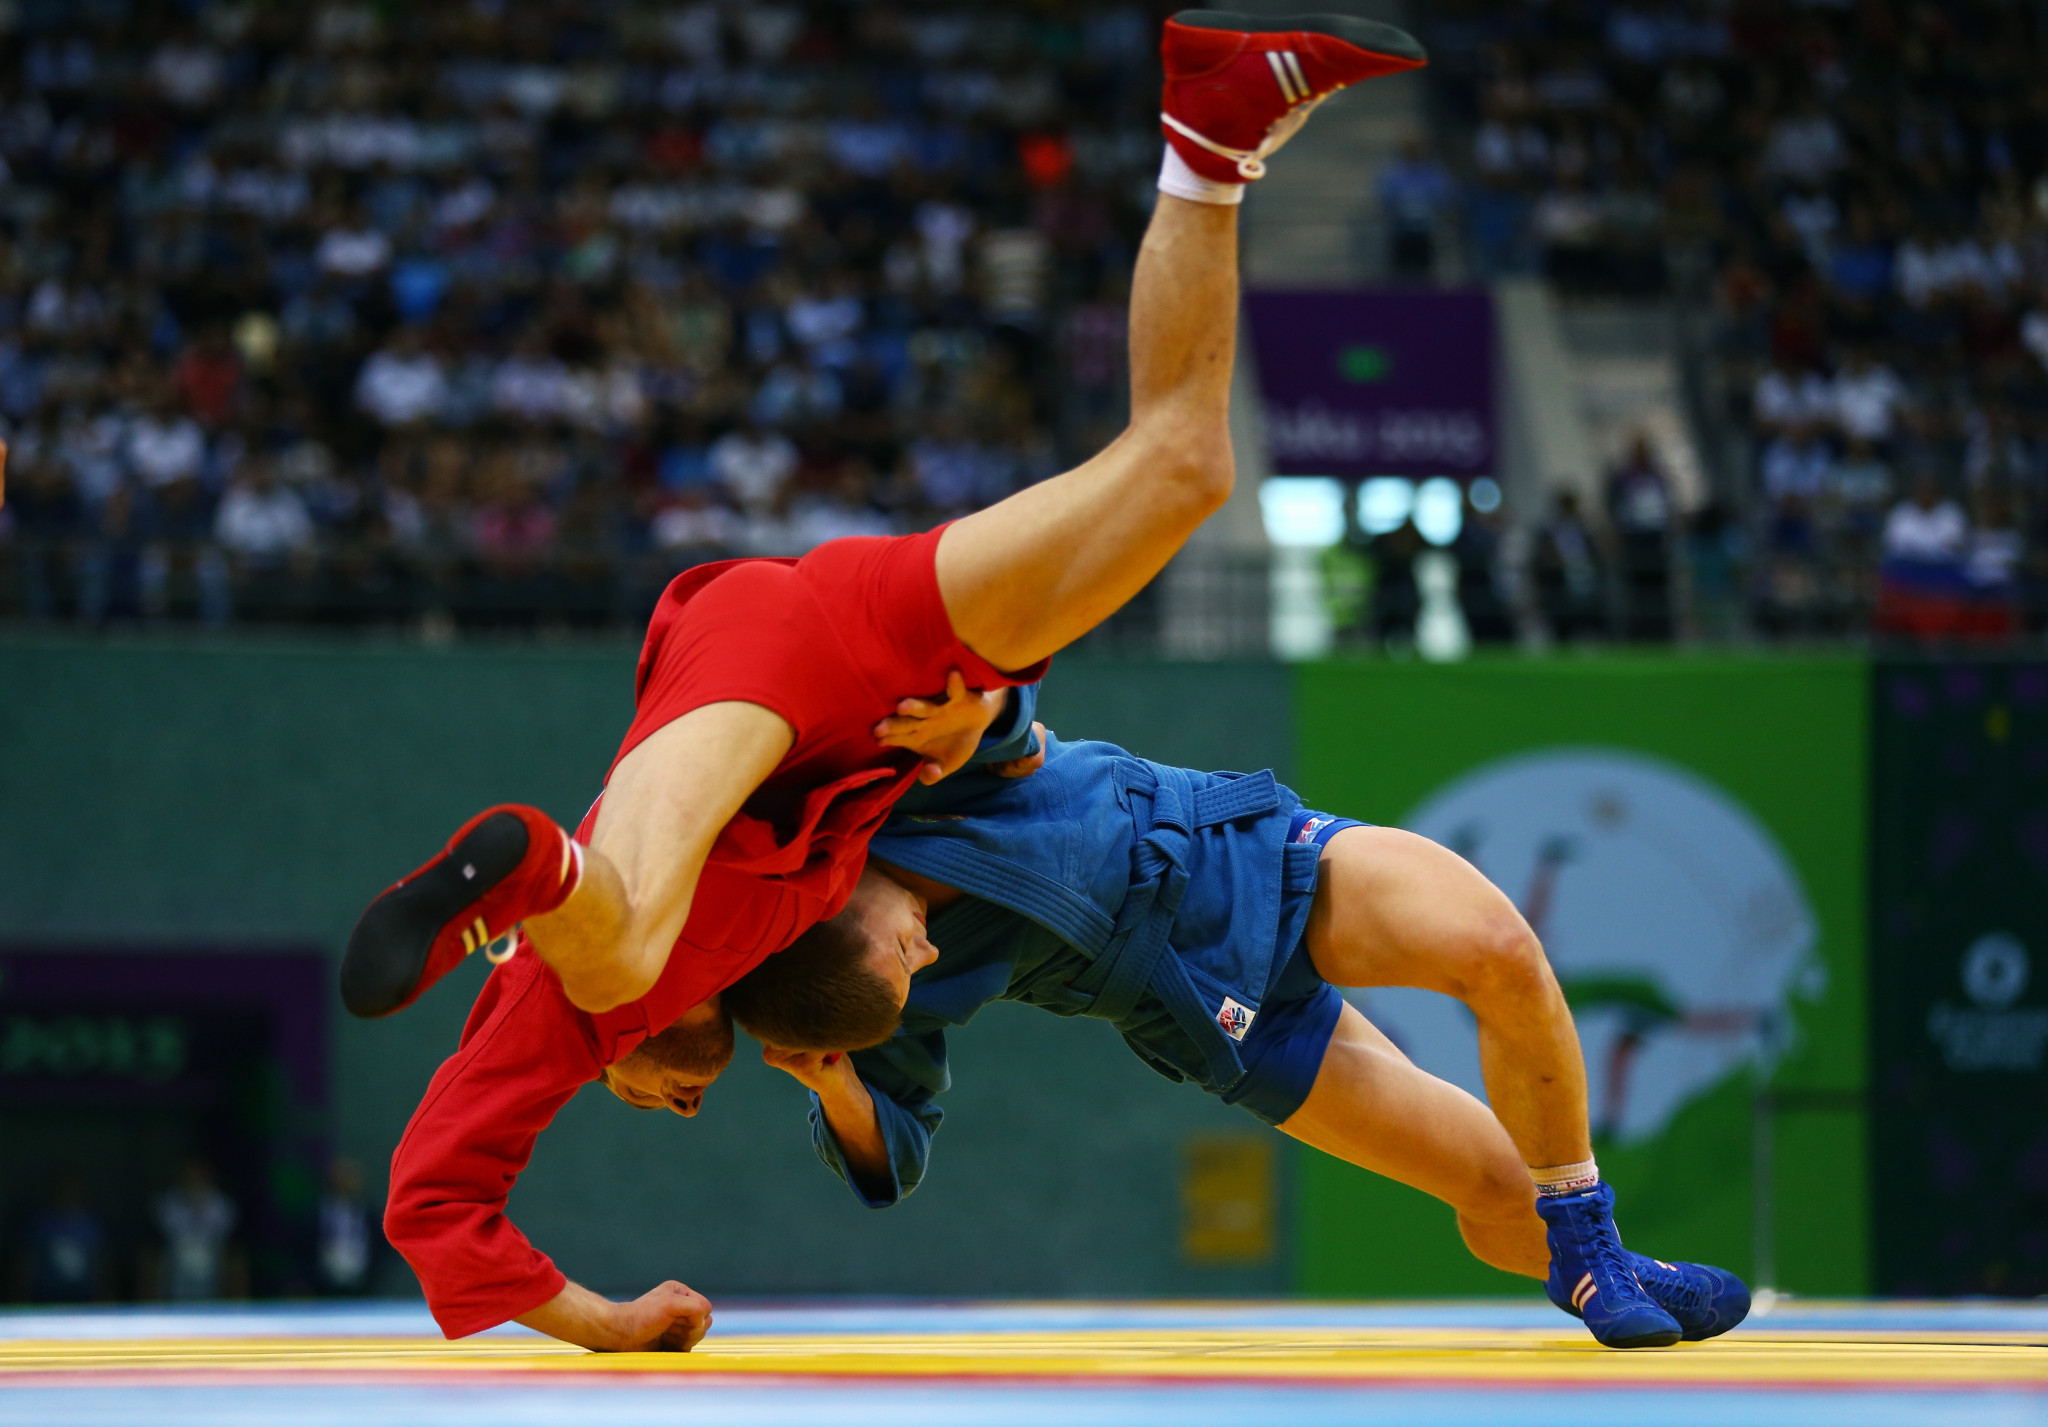 The gold medallists will head to the World Championships, due to be held in Turkmenistan in November ©Getty Images